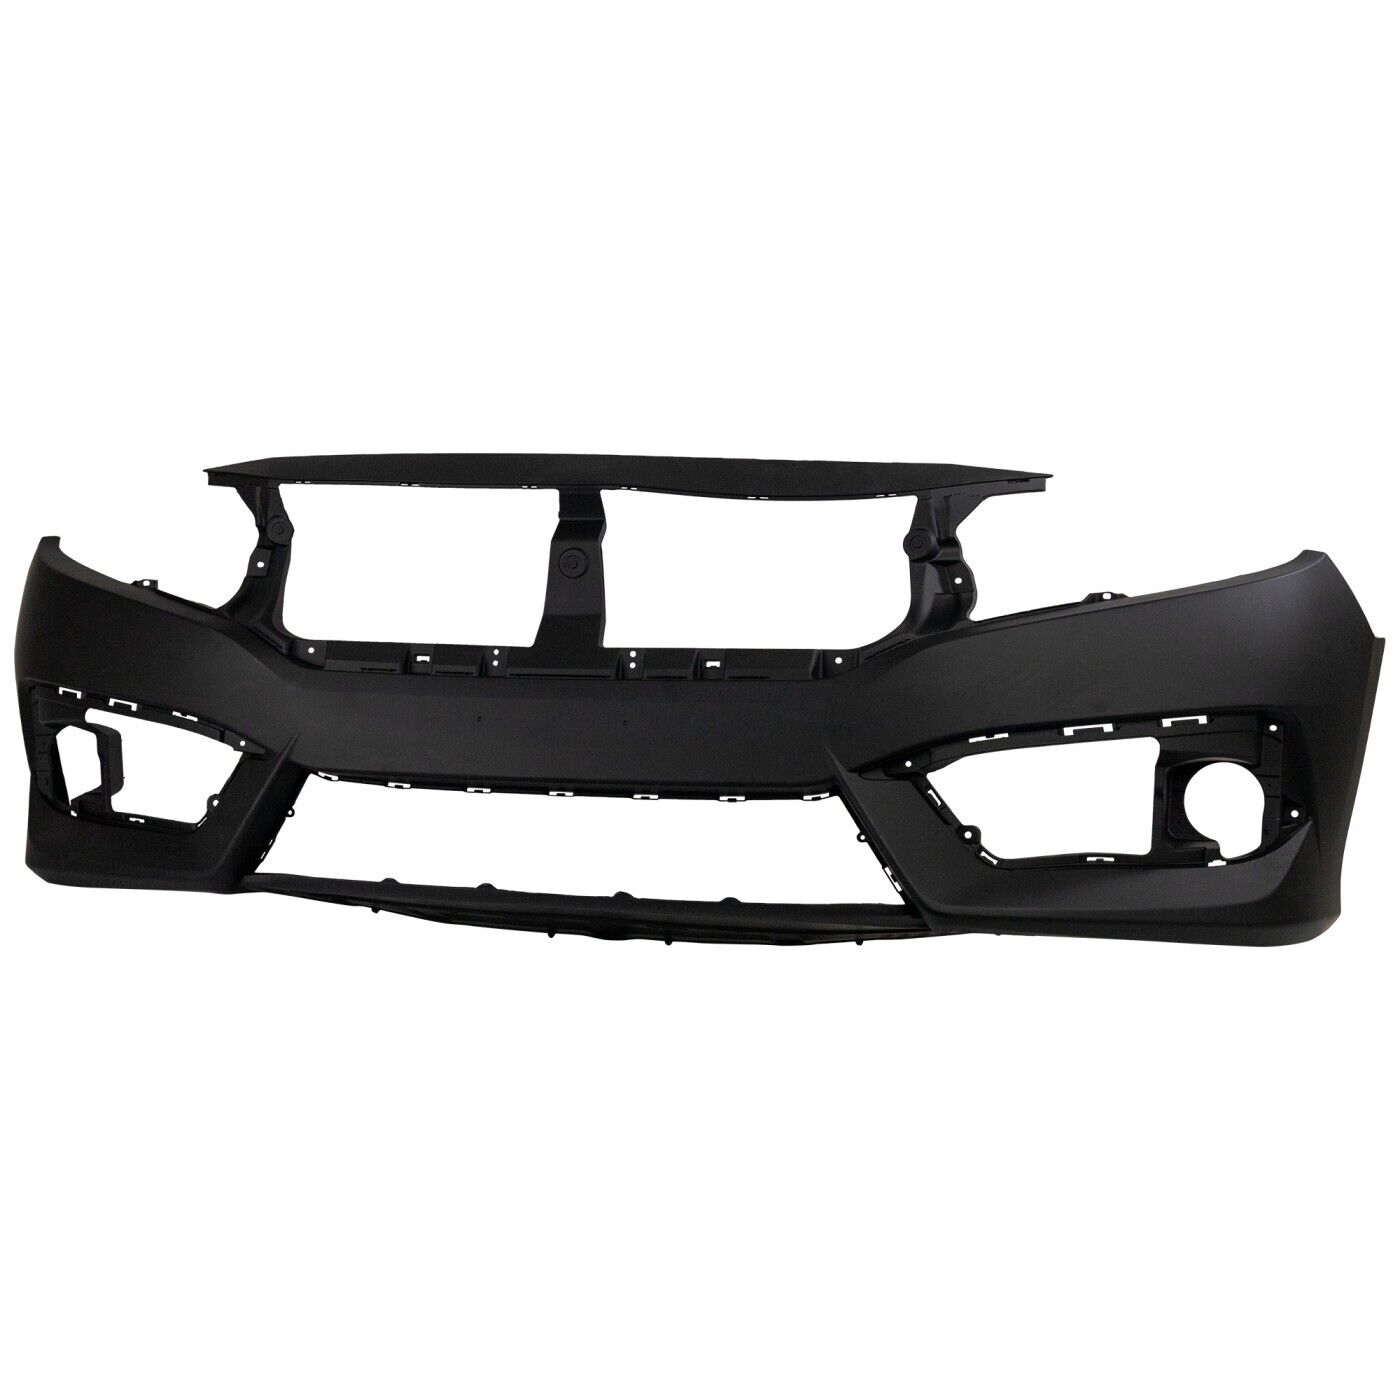 Front Bumper Cover For 2016-2018 Honda Civic USA Built Vehicle Coupe Sedan